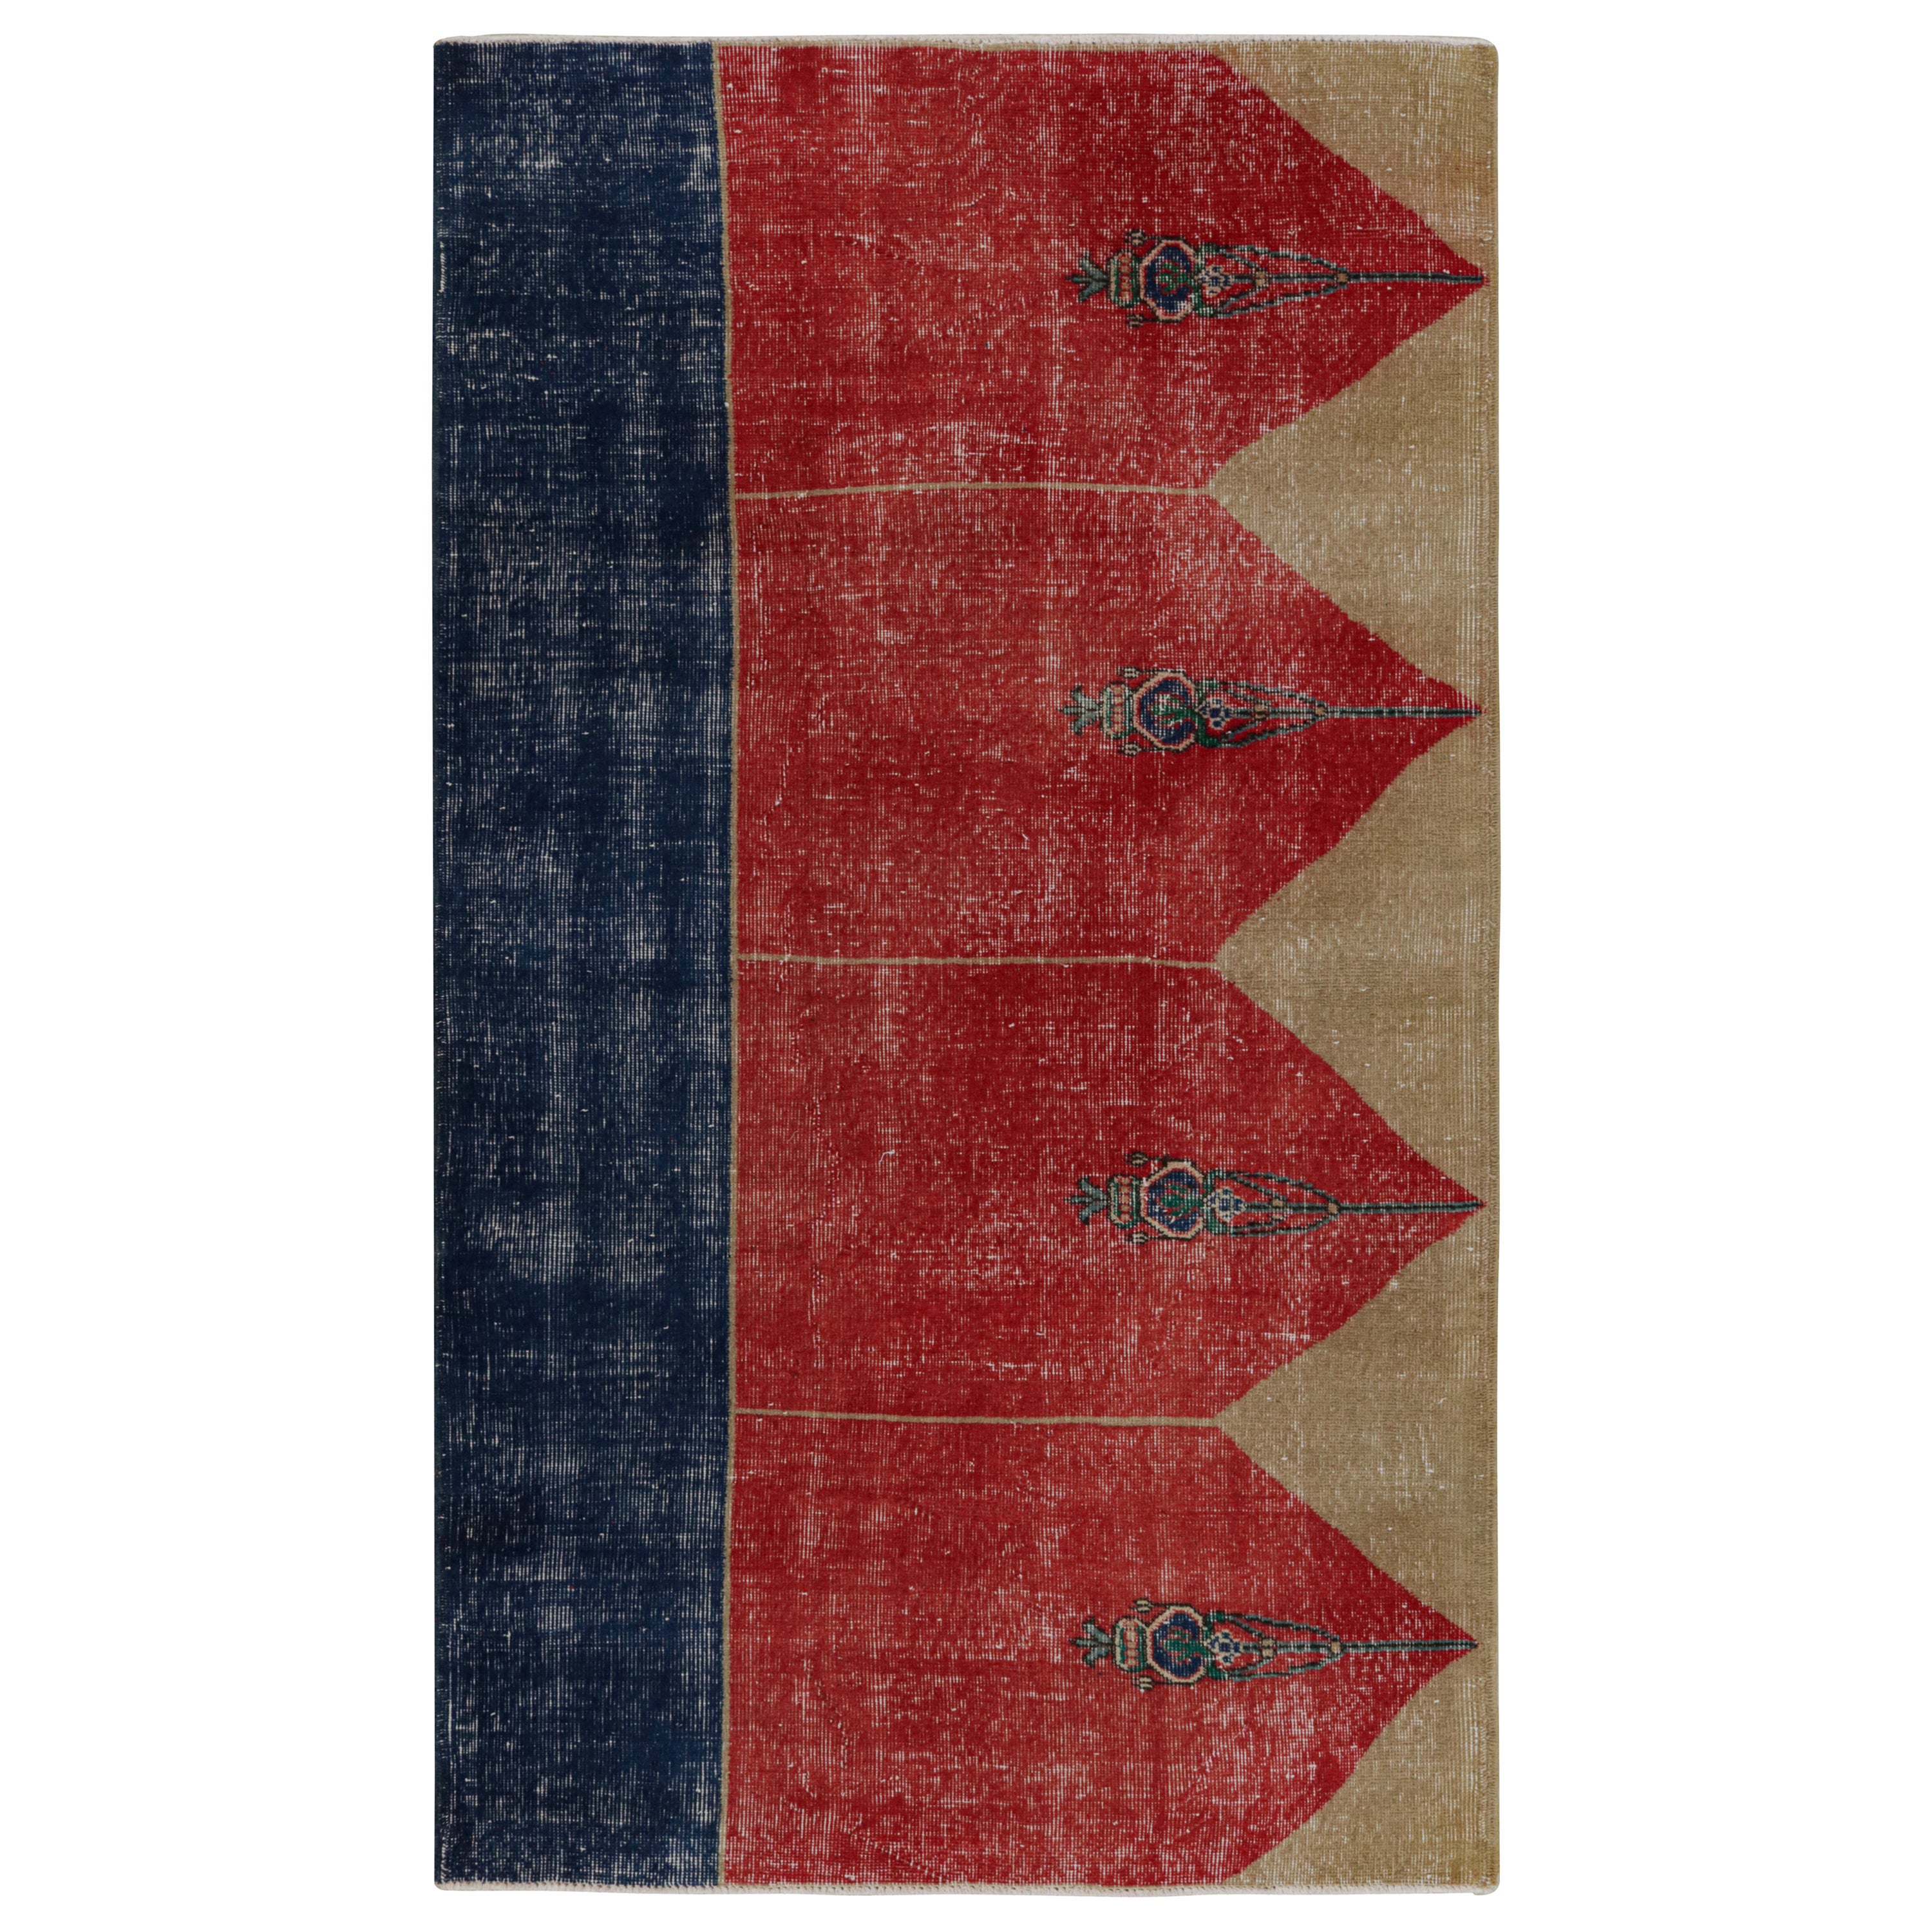 Vintage Turkish Rug in Red, with Geometric Patterns, from Rug & Kilim For Sale